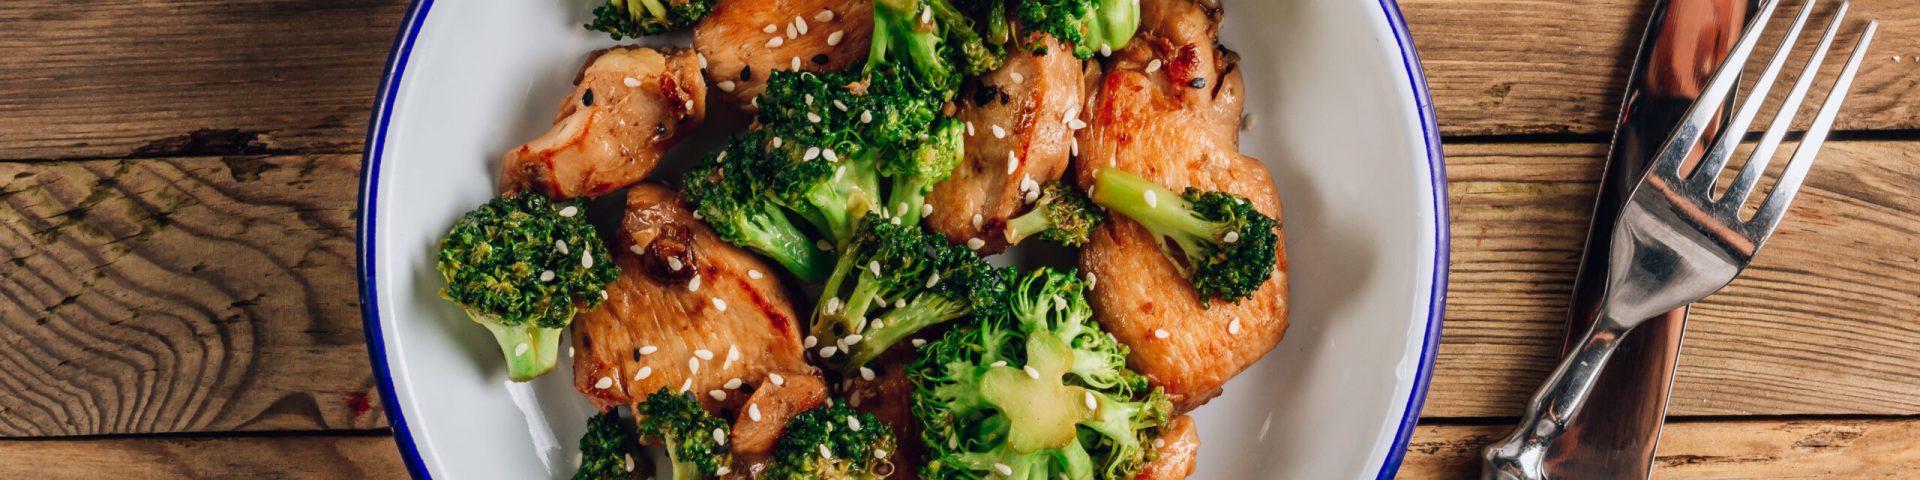 Chicken breasts and broccoli in soy sauce with sesame seeds for keto diet lunch. Rustic wooden background. Healthy food. Top view